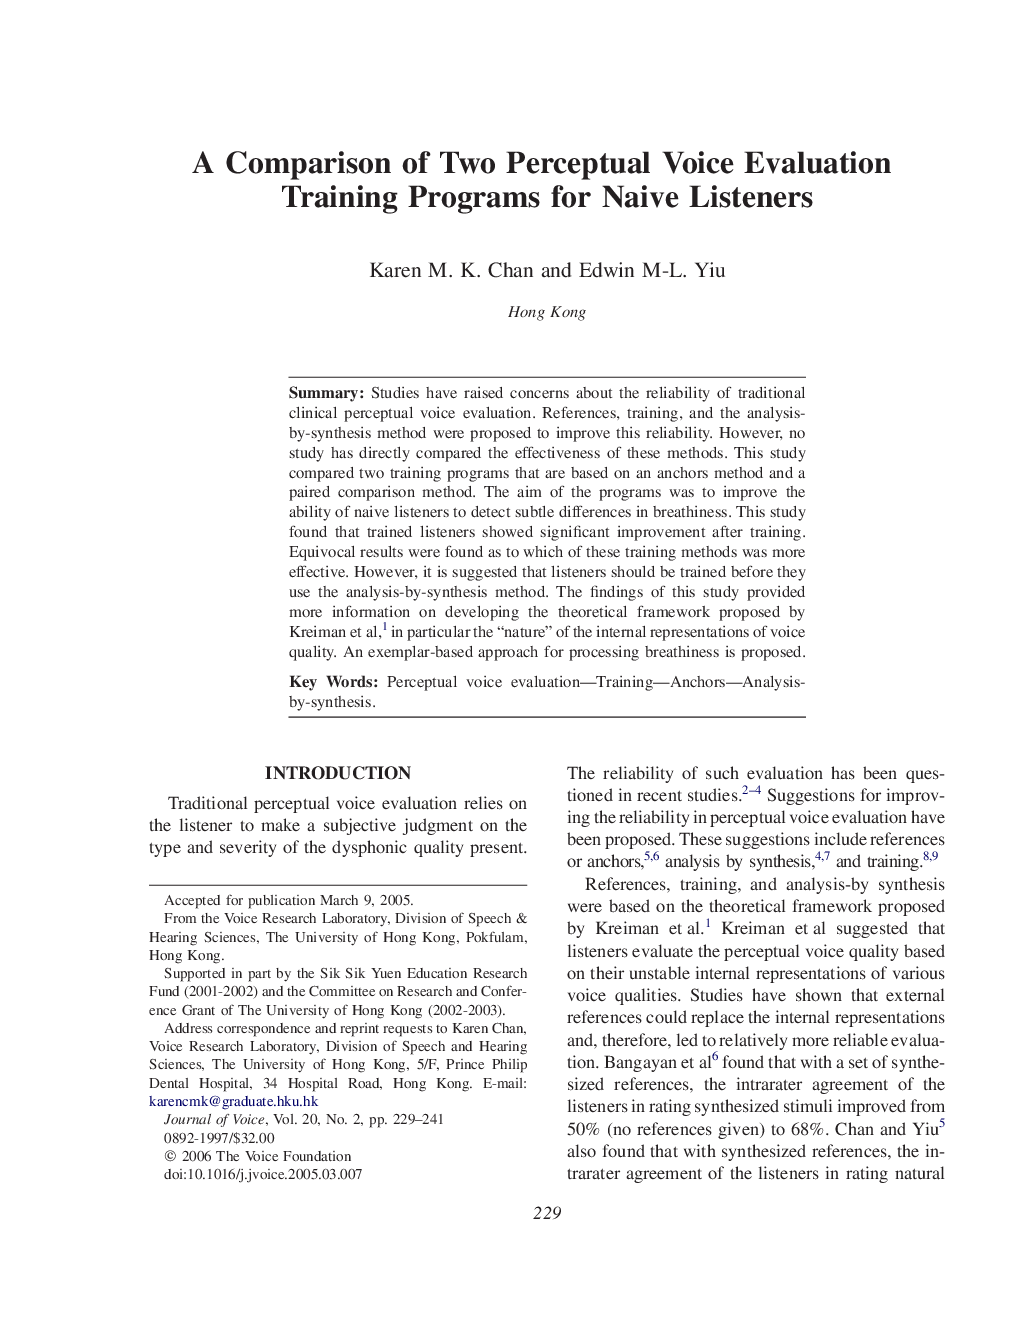 A Comparison of Two Perceptual Voice Evaluation Training Programs for Naive Listeners 